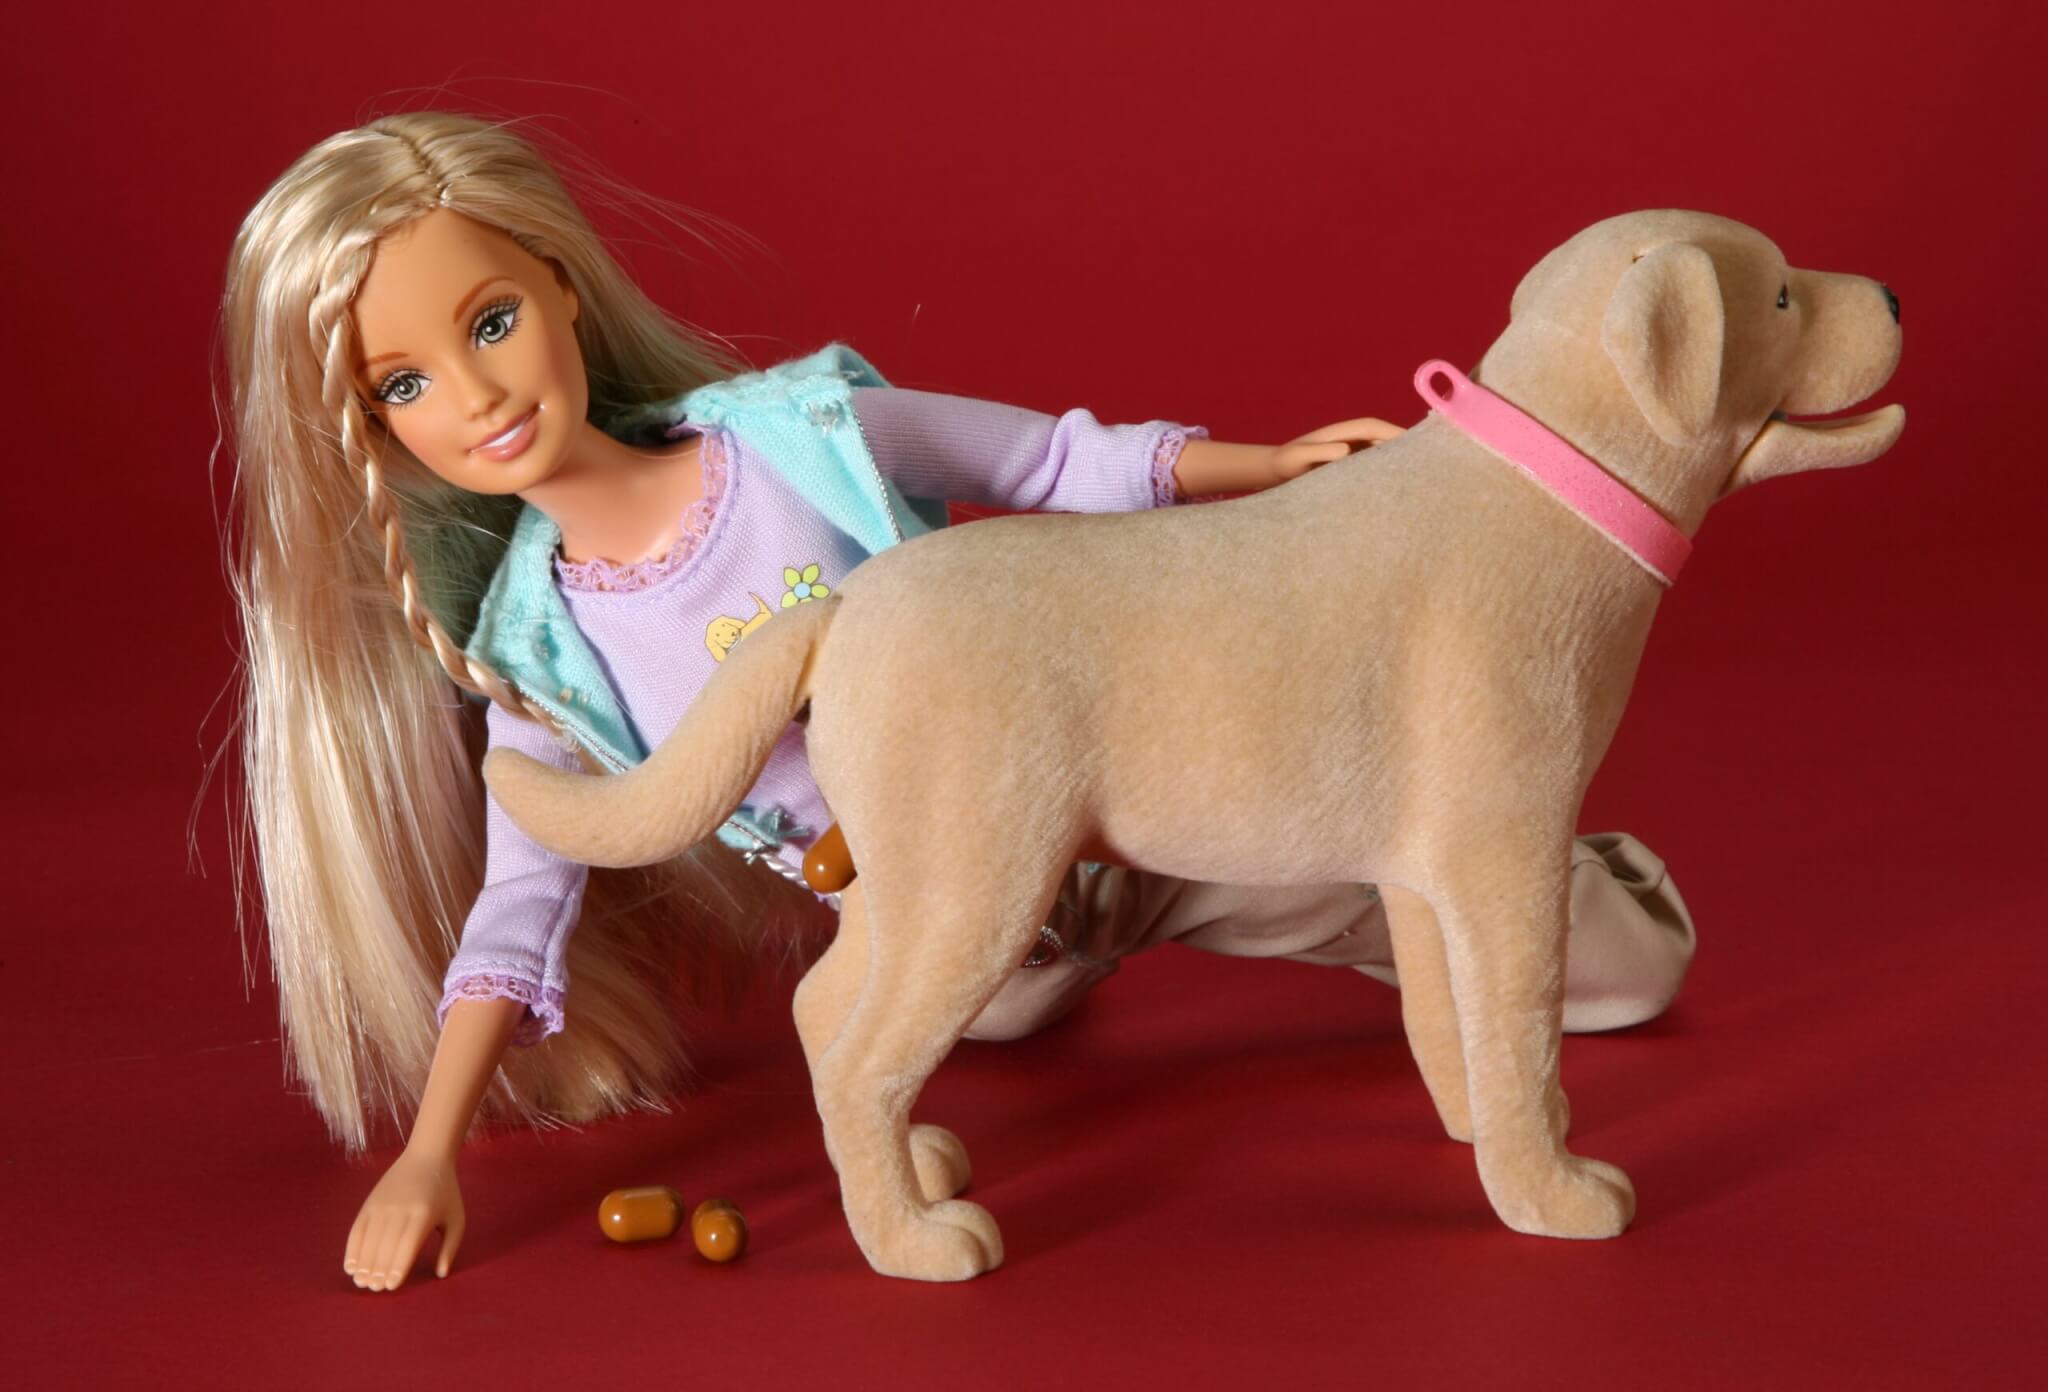 Mattel Barbie doll with Tanner the defecating dog